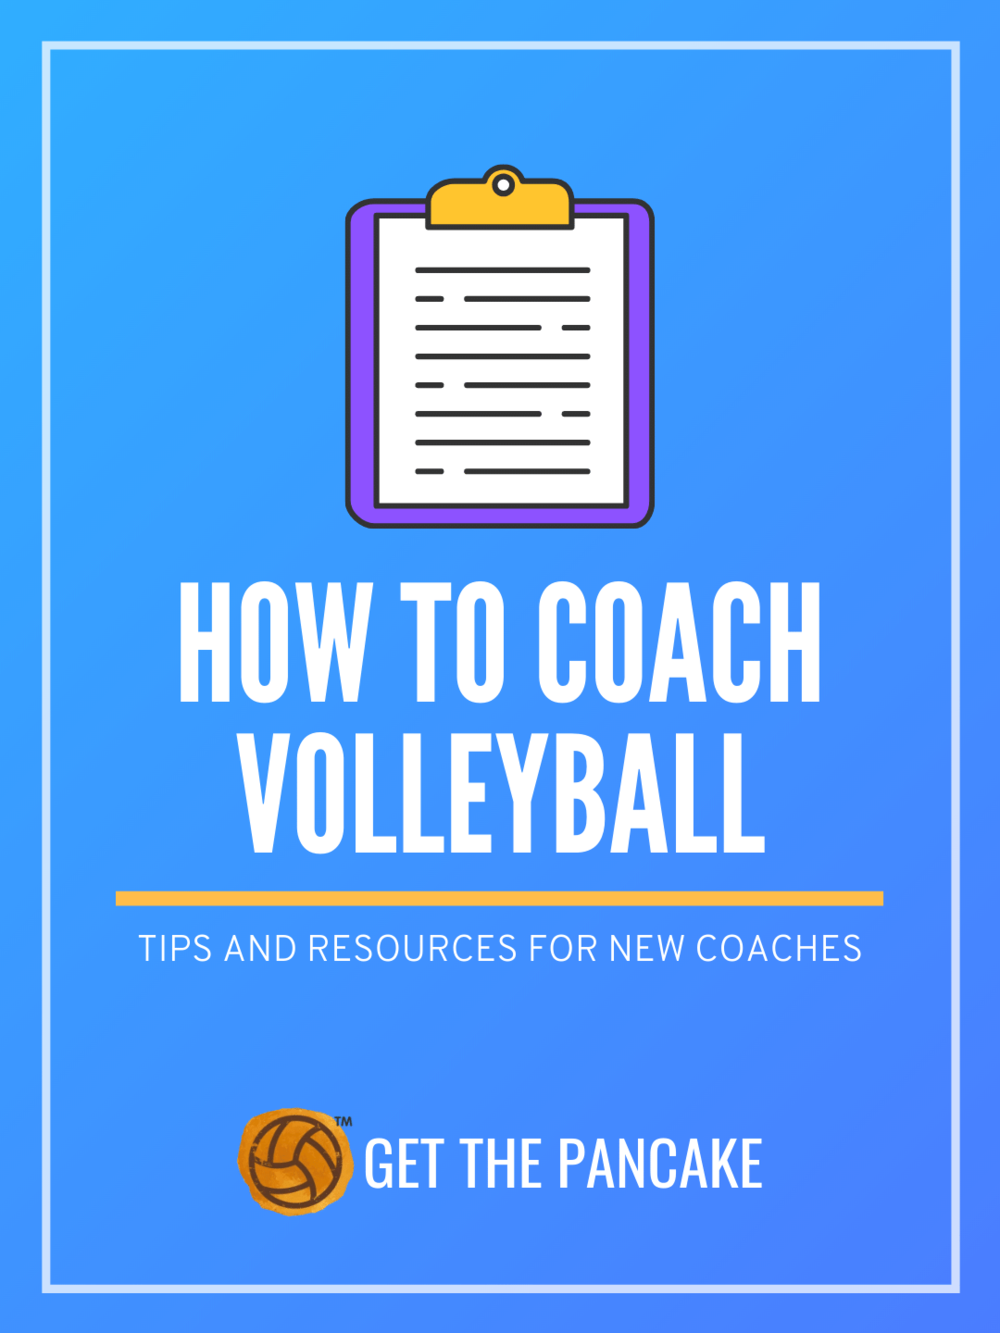 How To Coach Volleyball (Checklist Included)